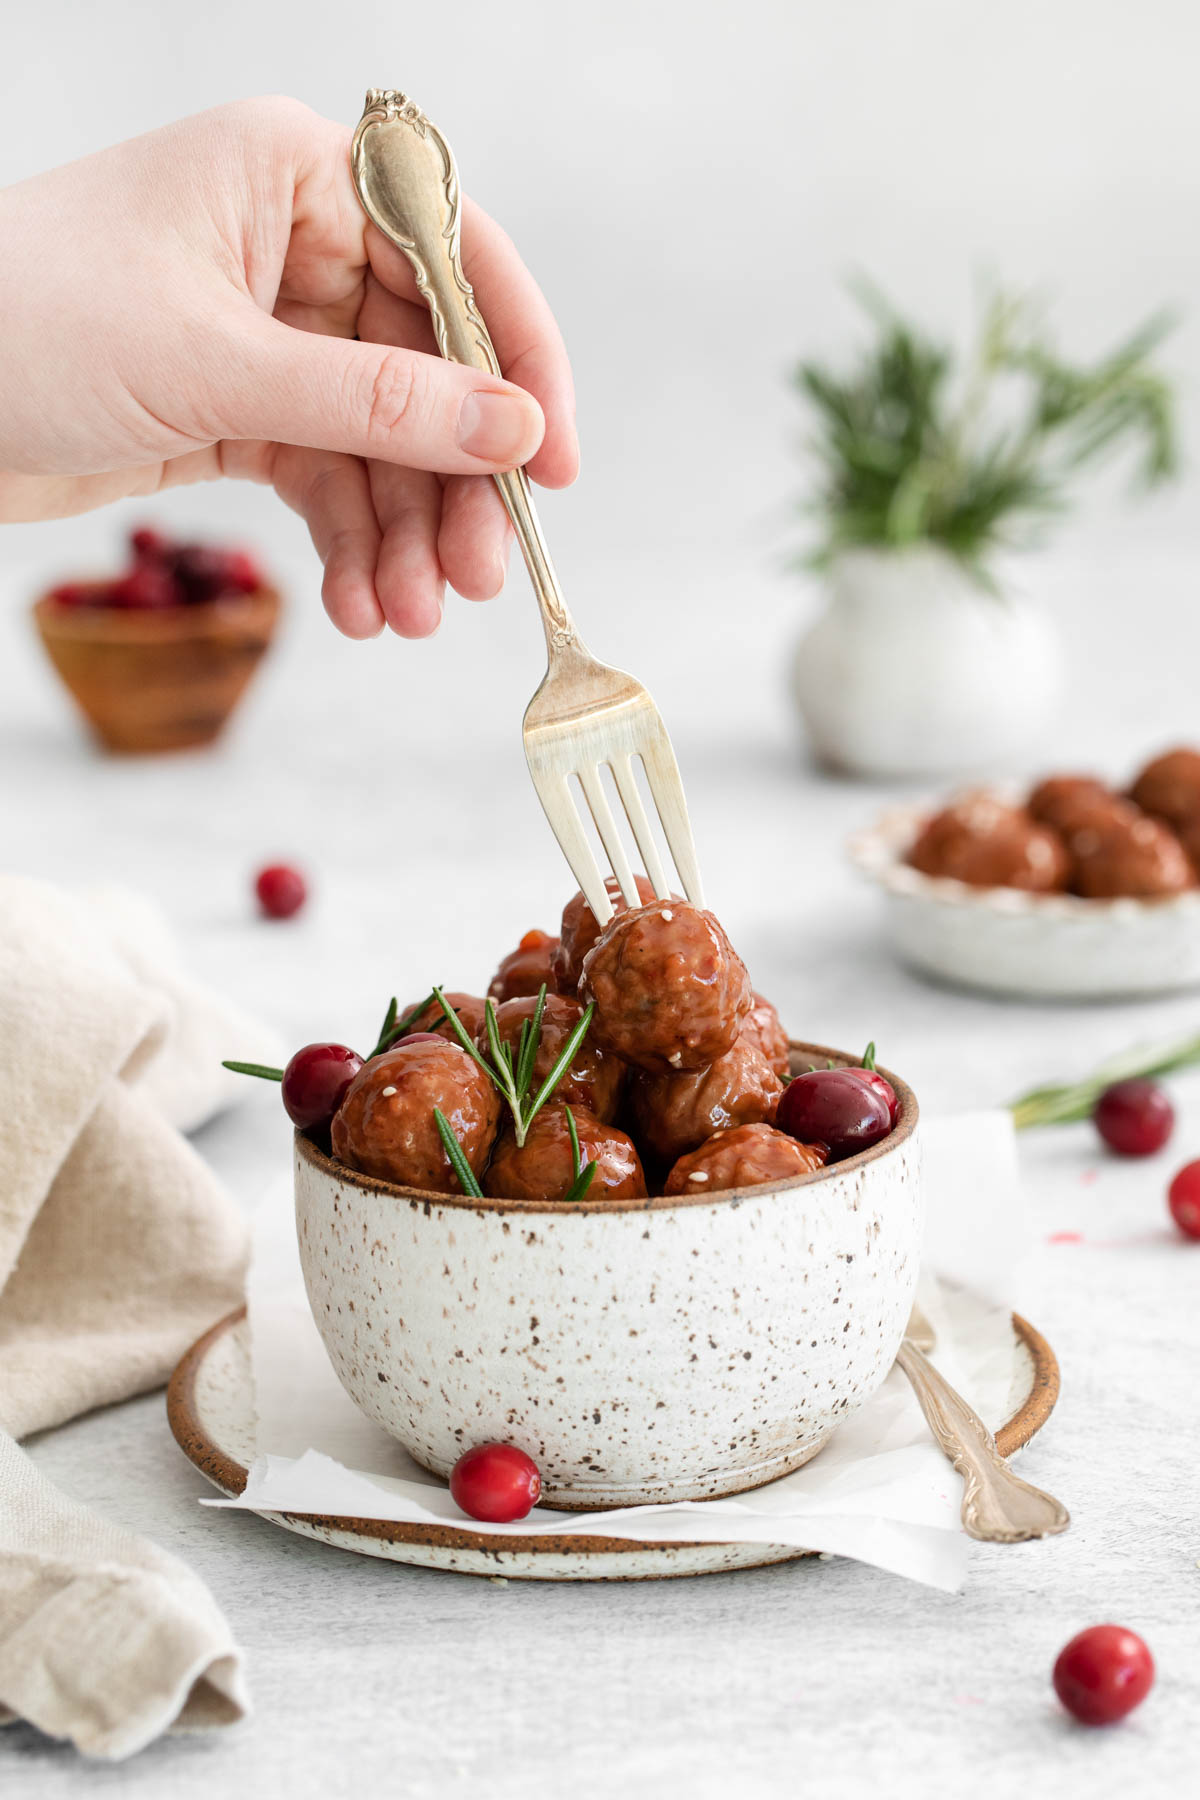 A bowl of cranberry meatballs are displayed, with a hand holding a fork in the process of selecting a meatball. Other bowls and a sprig of rosemary are visible in the background. 